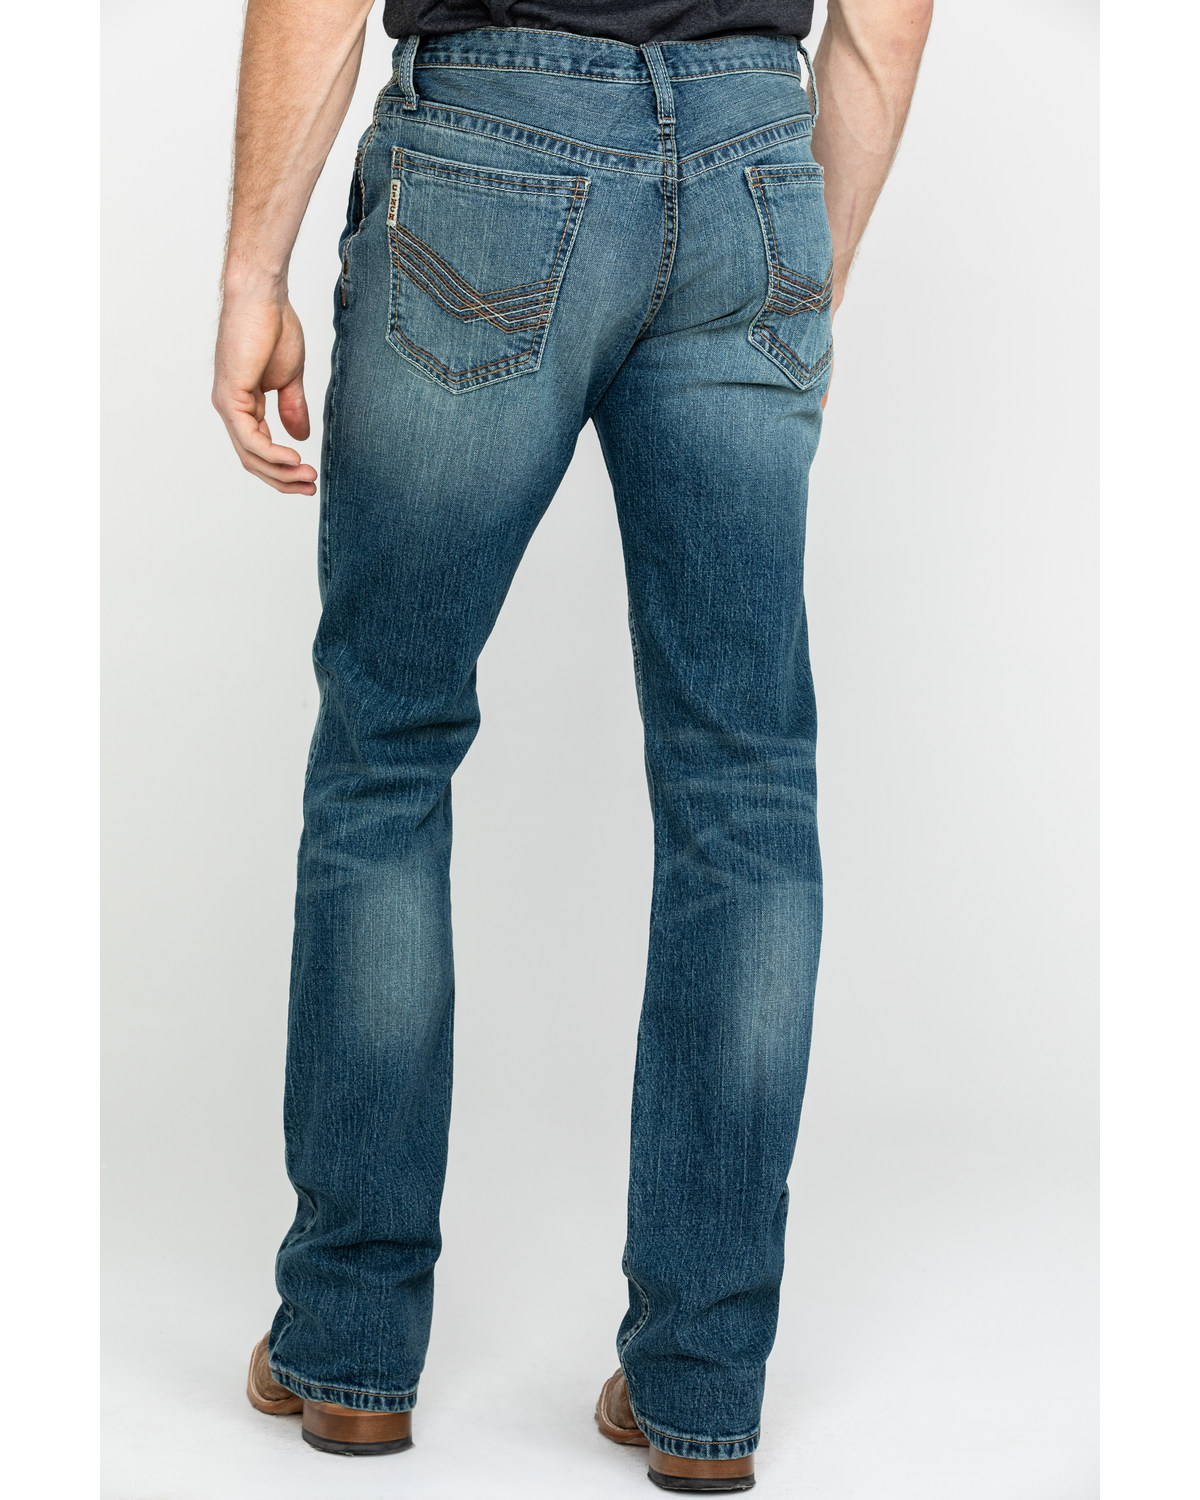 mens mid rise jeans